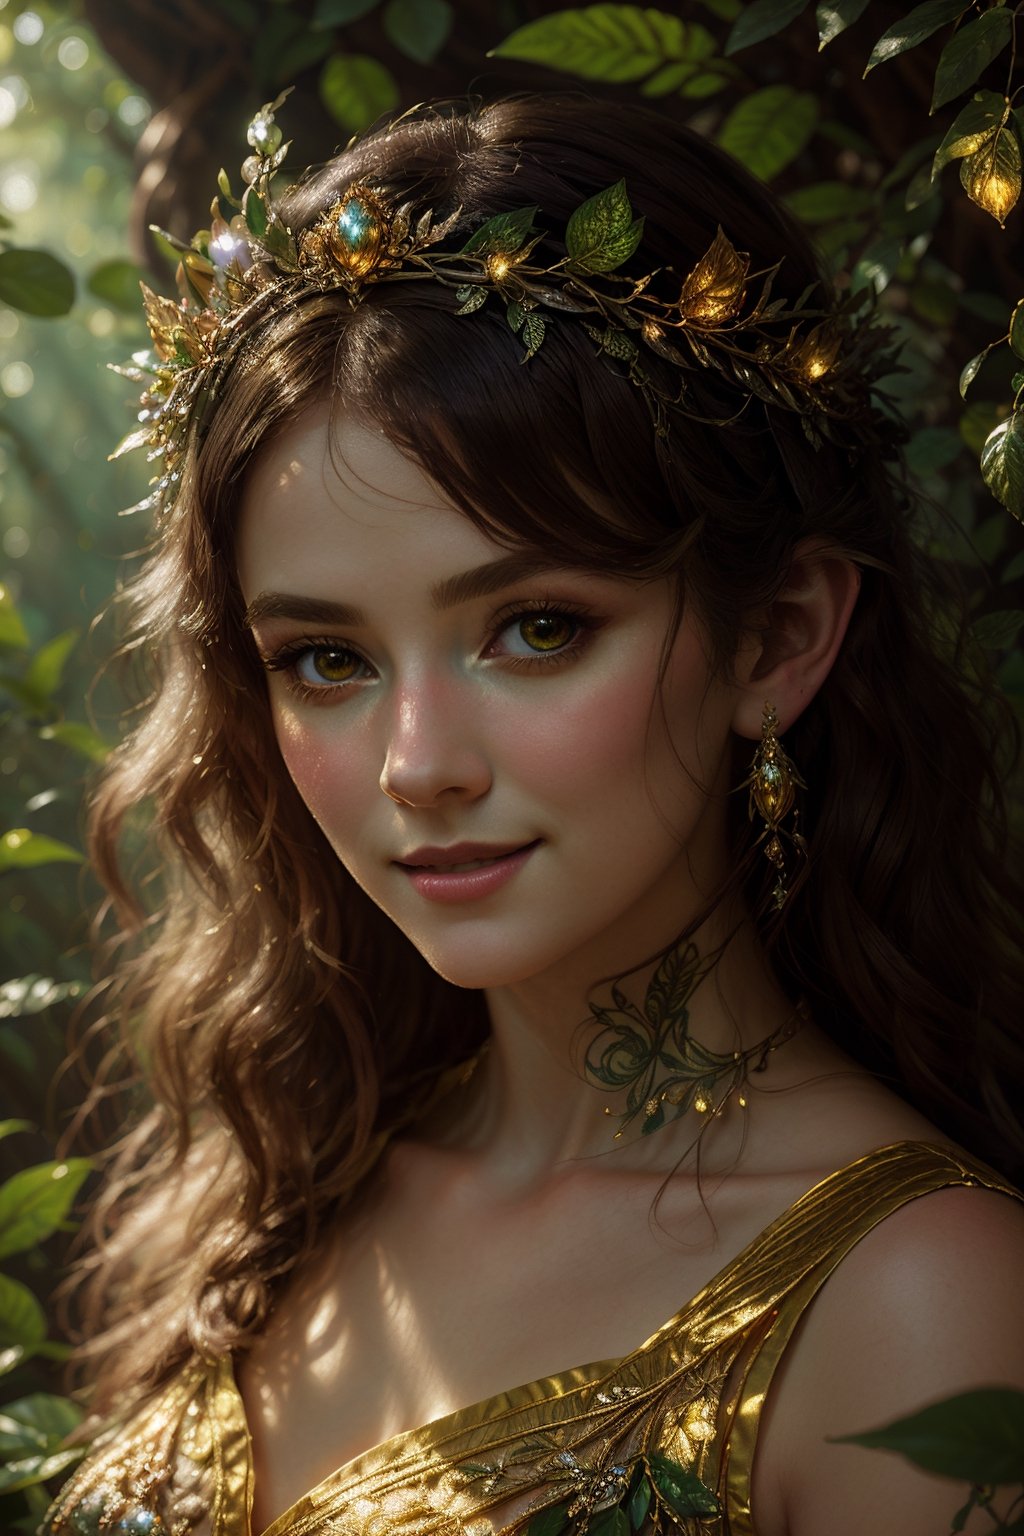 High quality, masterpiece, 8K, portrait, elven queen in a lush forest, shimmering golden gown, jeweled tiara, enigmatic smile, surrounded by ethereal glowing fauna, (magic-infused:1.4), vivid colors, intricate foliage patterns, chiaroscuro lighting, (Pre-Raphaelite art style:1.2)